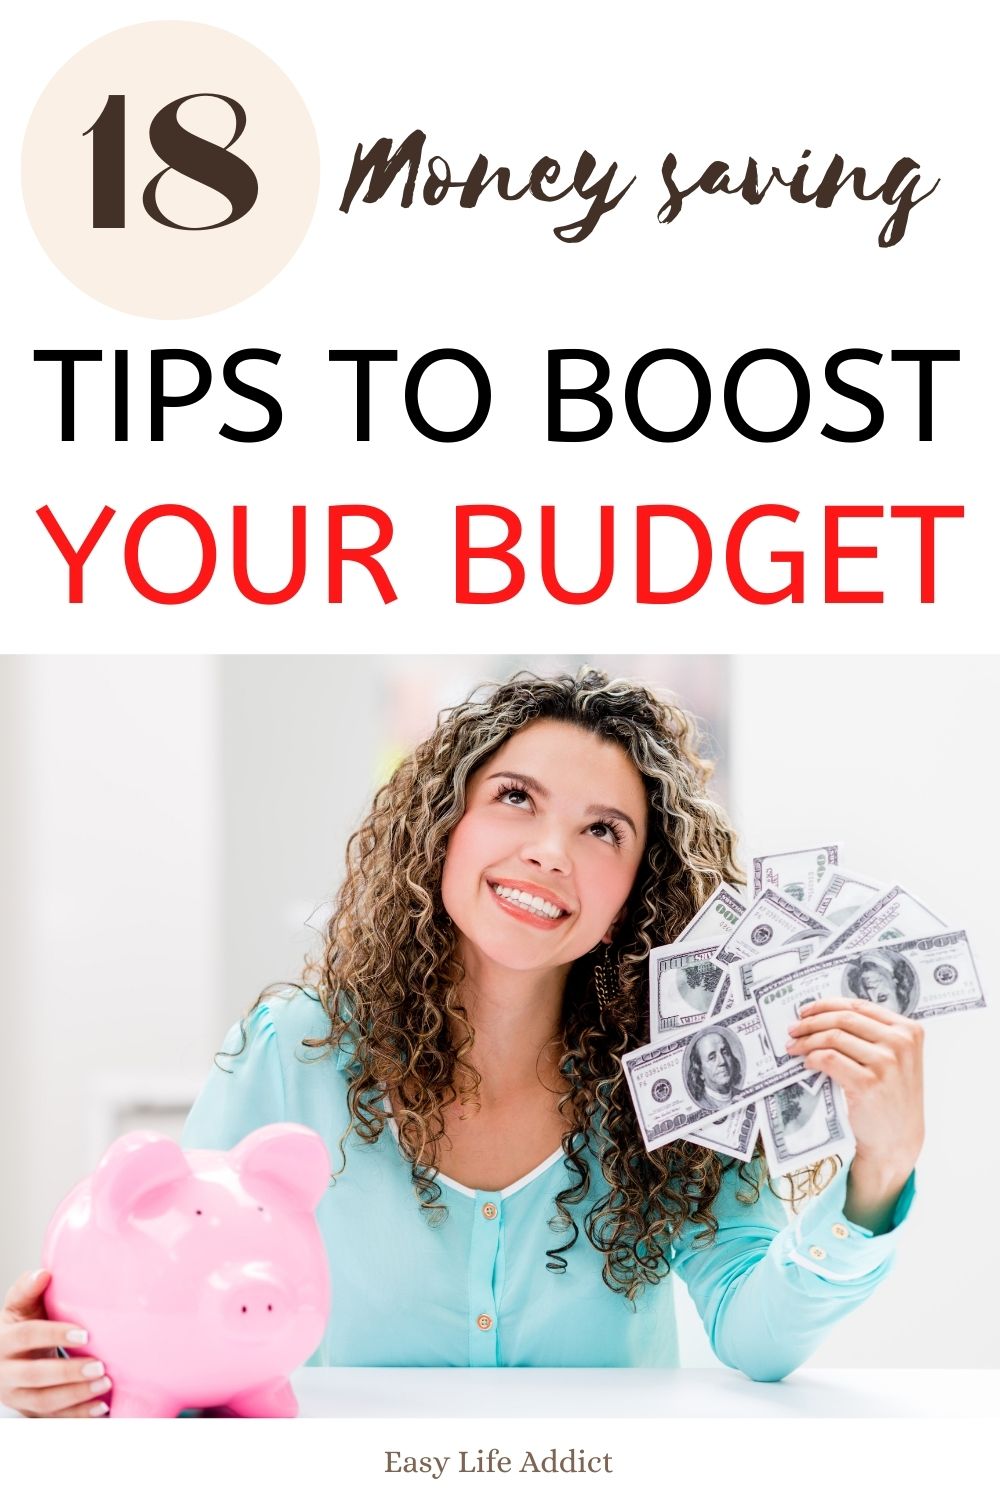 18 Money saving tips to boost your budget